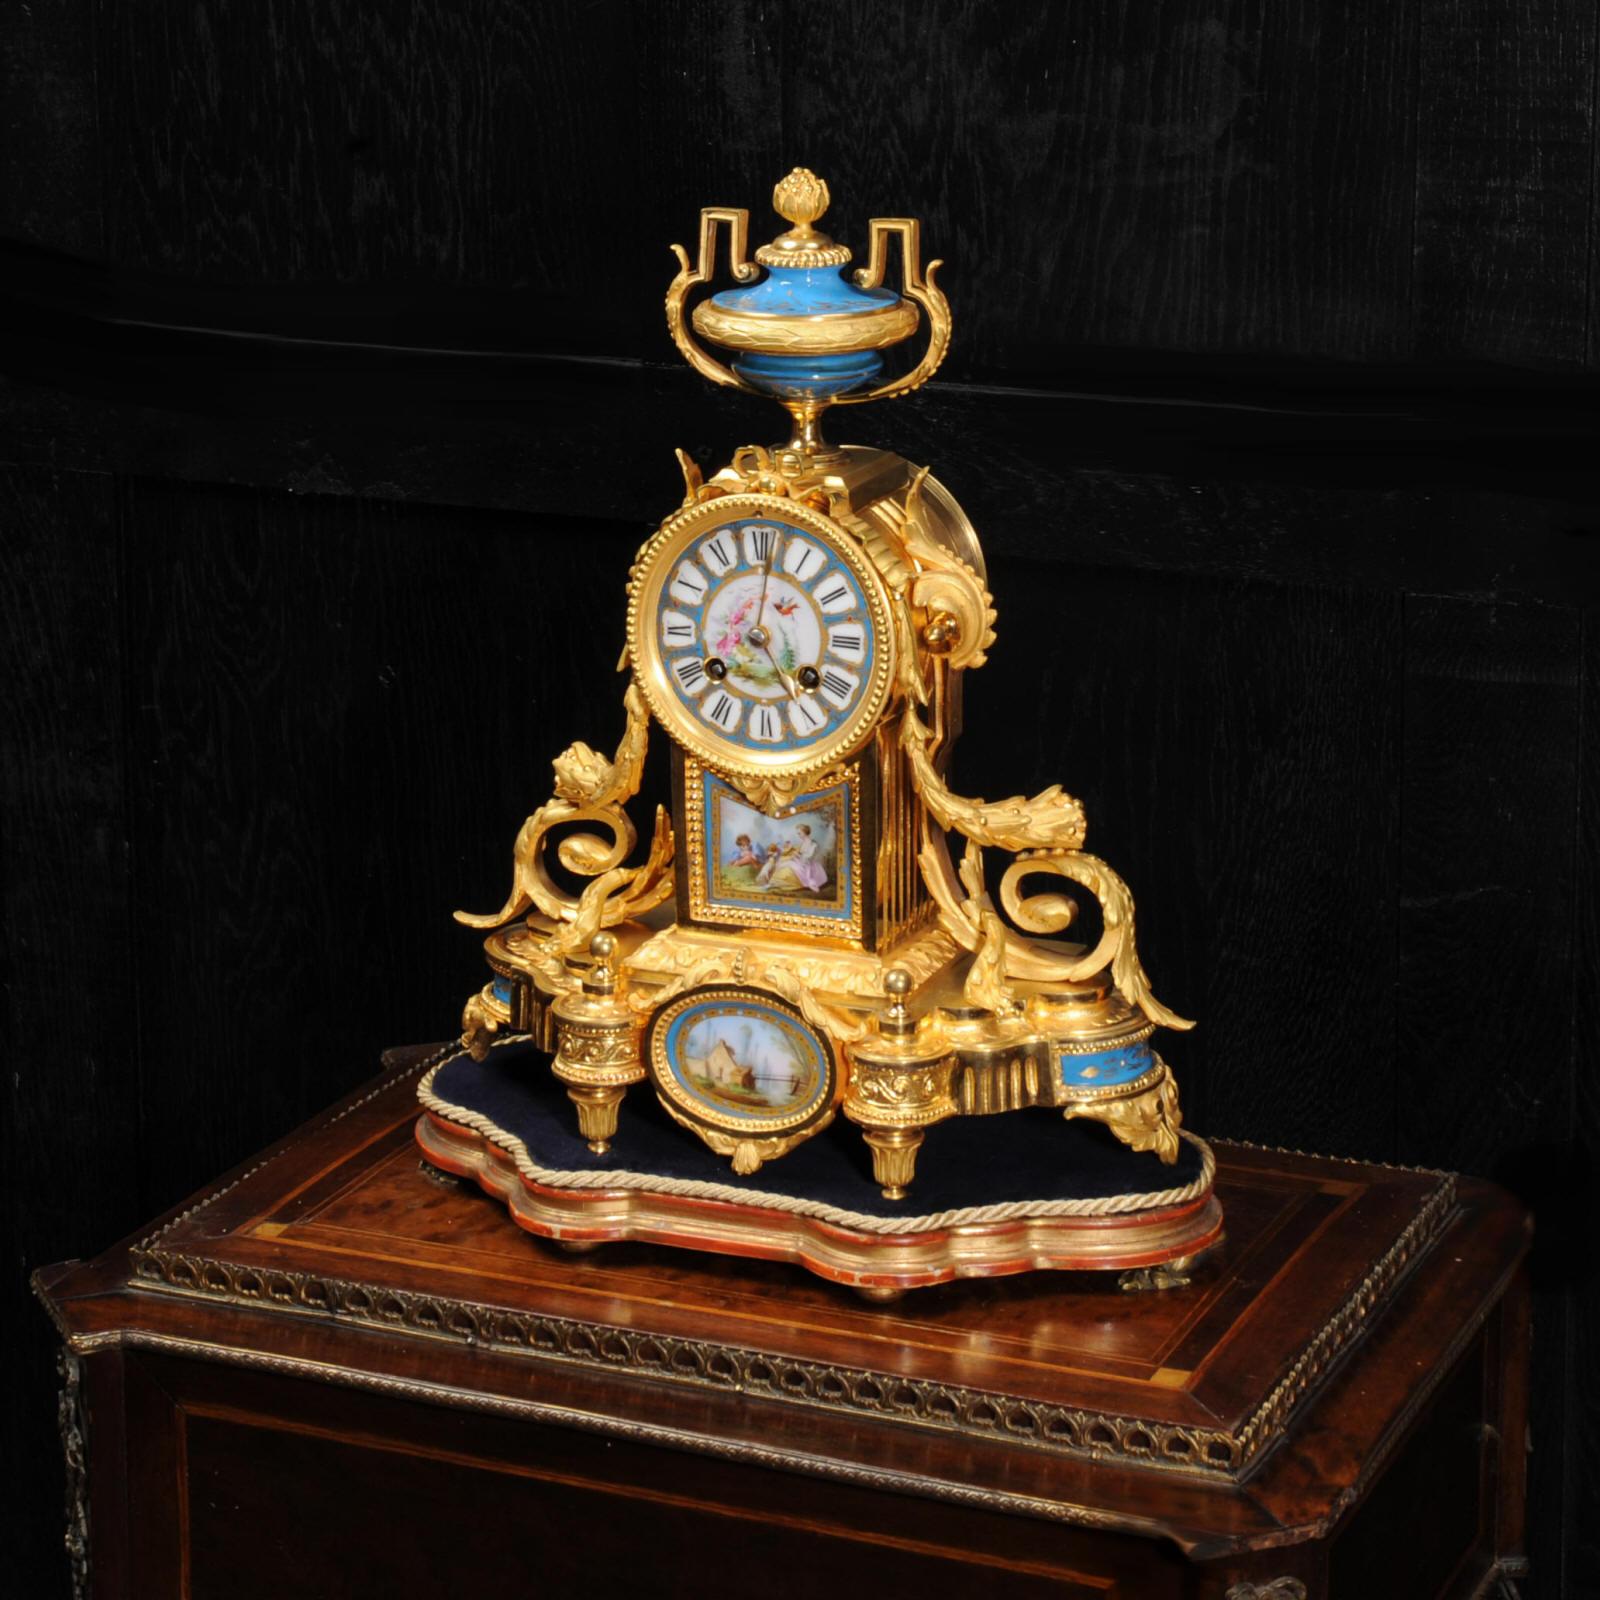 A stunning original antique French clock by Japy Freres. The crisp ormolu (finely gilded bronze), beautifully modelled and chased, is mounted with exquisite Sèvres style porcelain. Porcelain has a blue ground and is delicately painted with a